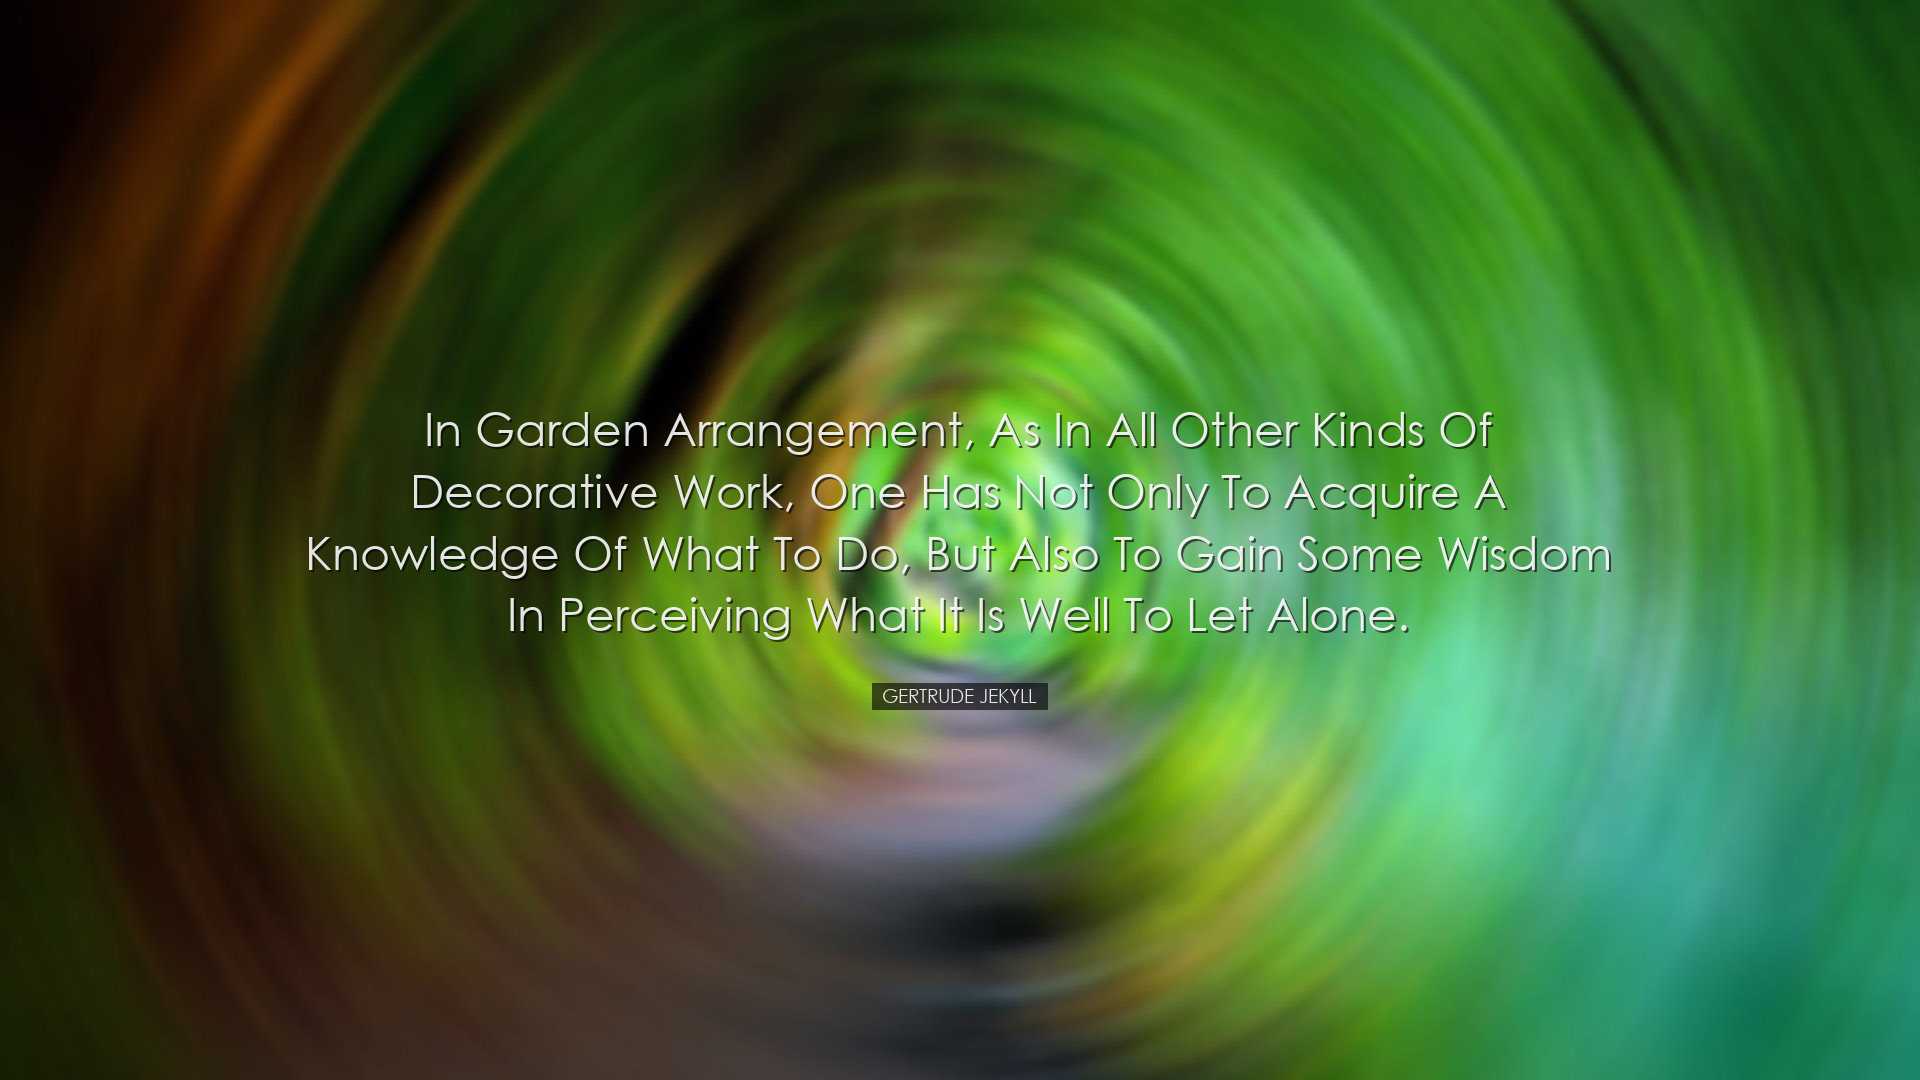 In garden arrangement, as in all other kinds of decorative work, o